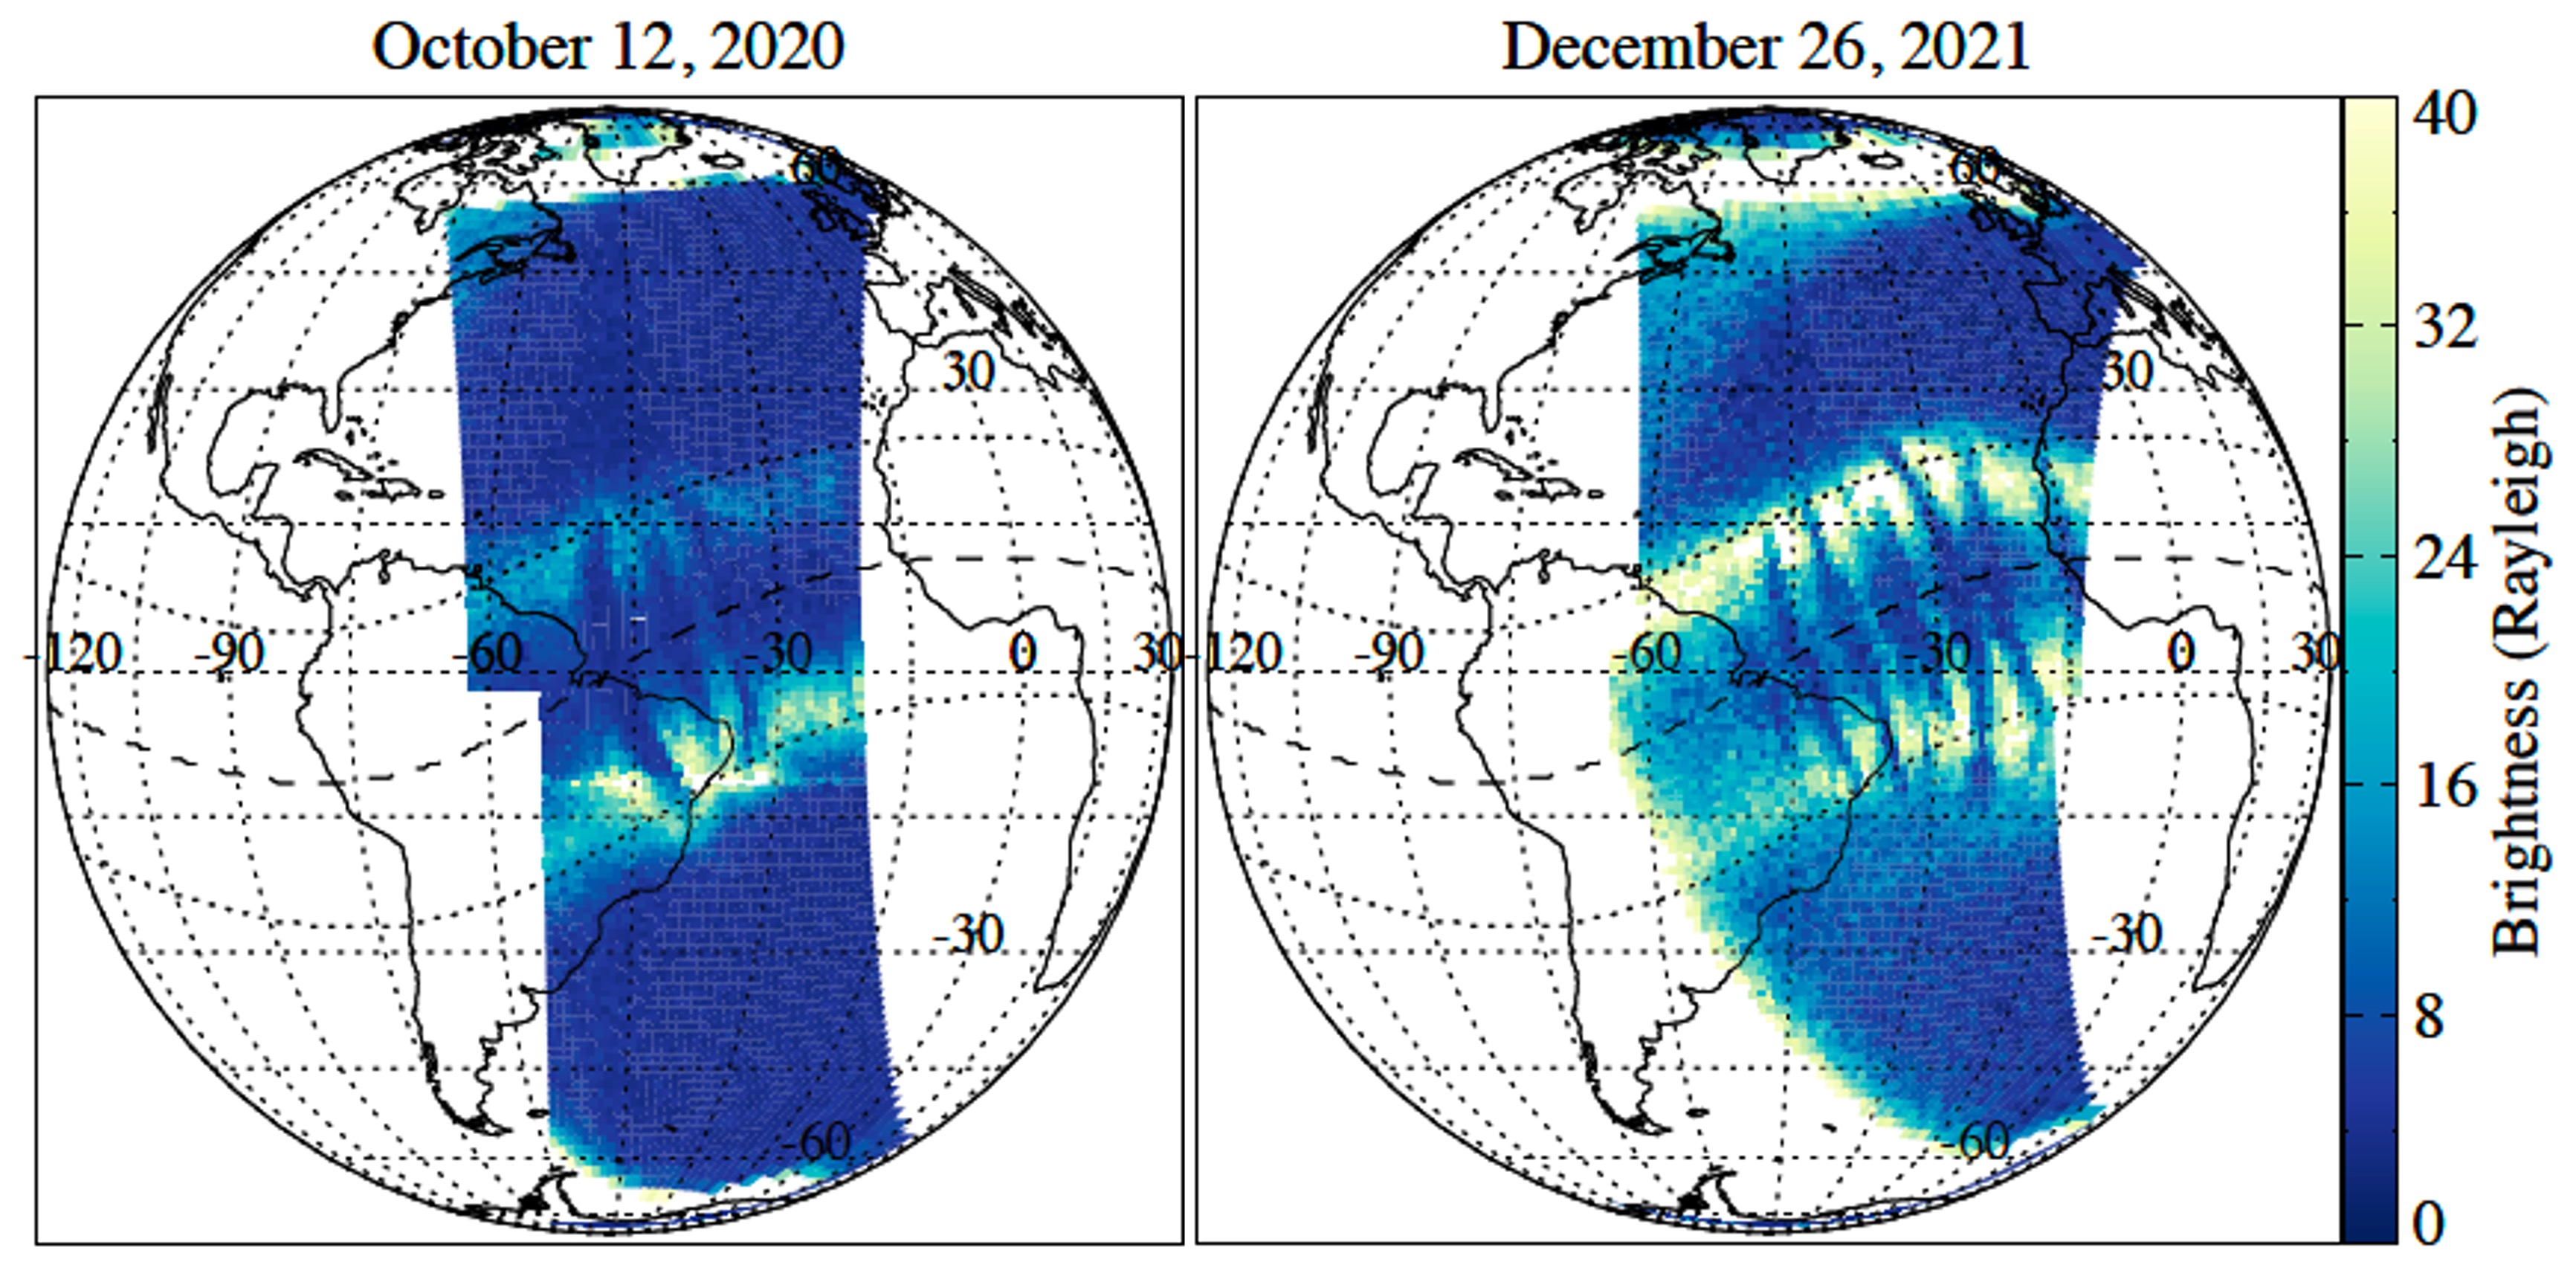 Two side-by-side illustrations of Earth’s Western Hemisphere, for October 12, 2020, on the left and December 26, 2021, on the right, are overlaid with blue-colored images showing two bright bands north and south of Earth’s magnetic equator (marked by a dashed line) and dark, curved, perpendicular bands extending between the bright bands.